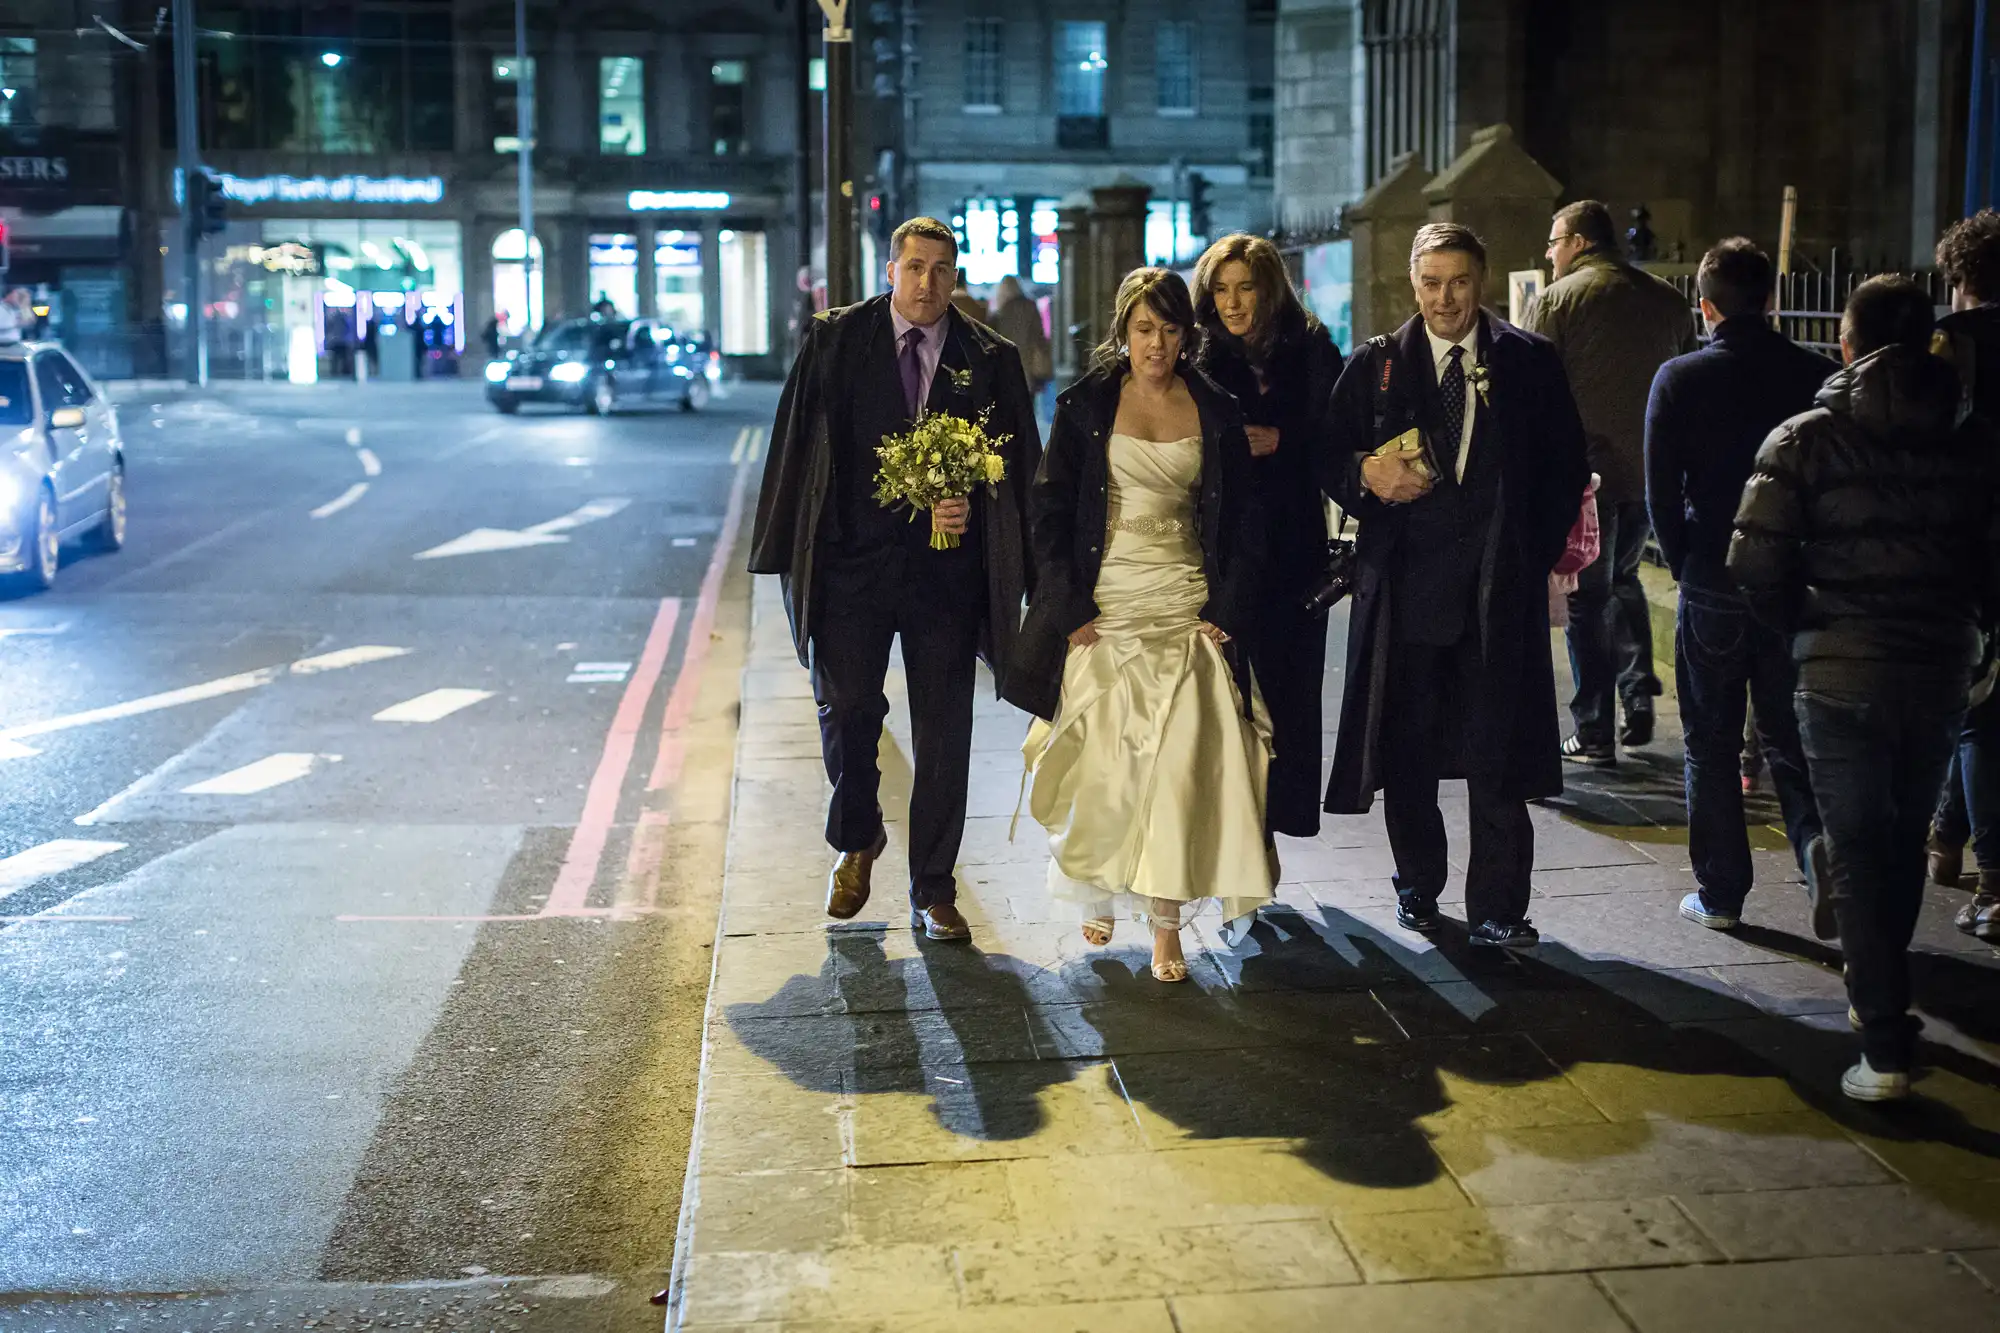 A newlywed couple with two companions crosses a city street at night, with bustling traffic and street lights in the background.